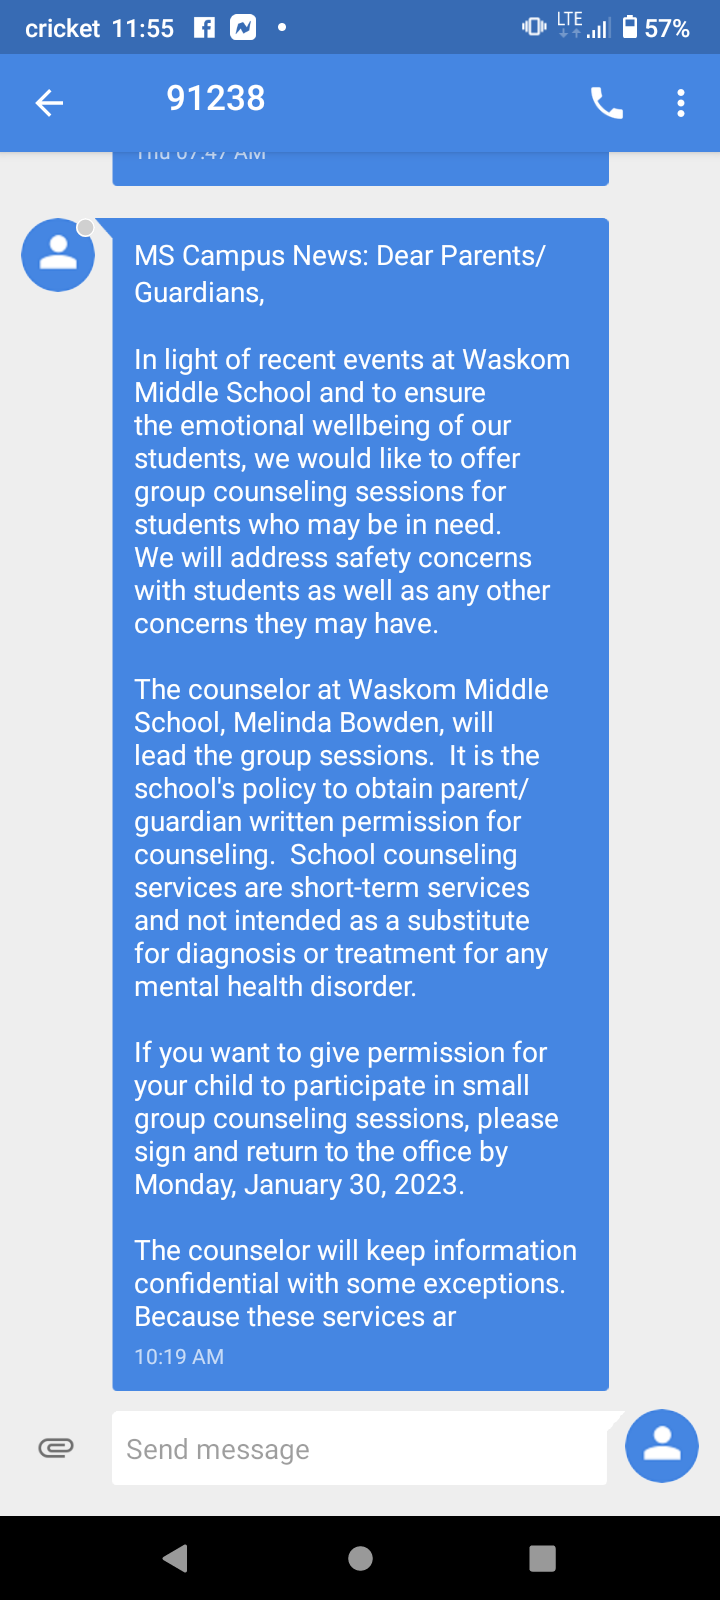 Waskom ISD sent this message out to parents and guardians on Jan. 27. This message was sent in light of recent events that occurred at Waskom Middle School.